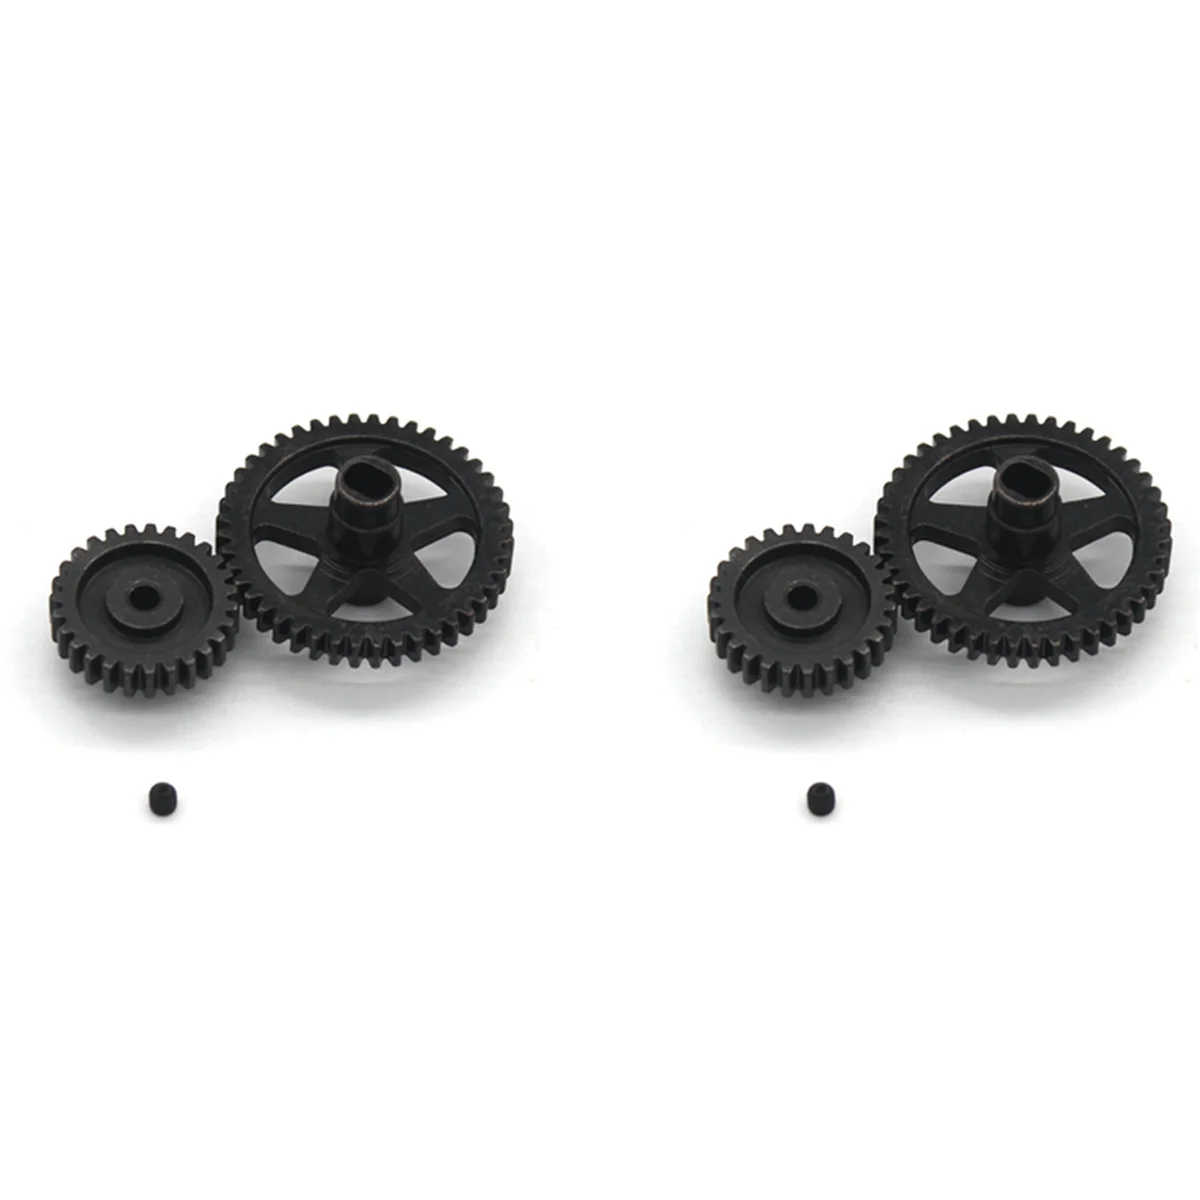 

2X Steel 44T Reduction Gear and 27T Motor Gear for Wltoys 144001 144002 144010 124016 124017 124018 124019 RC Car Parts